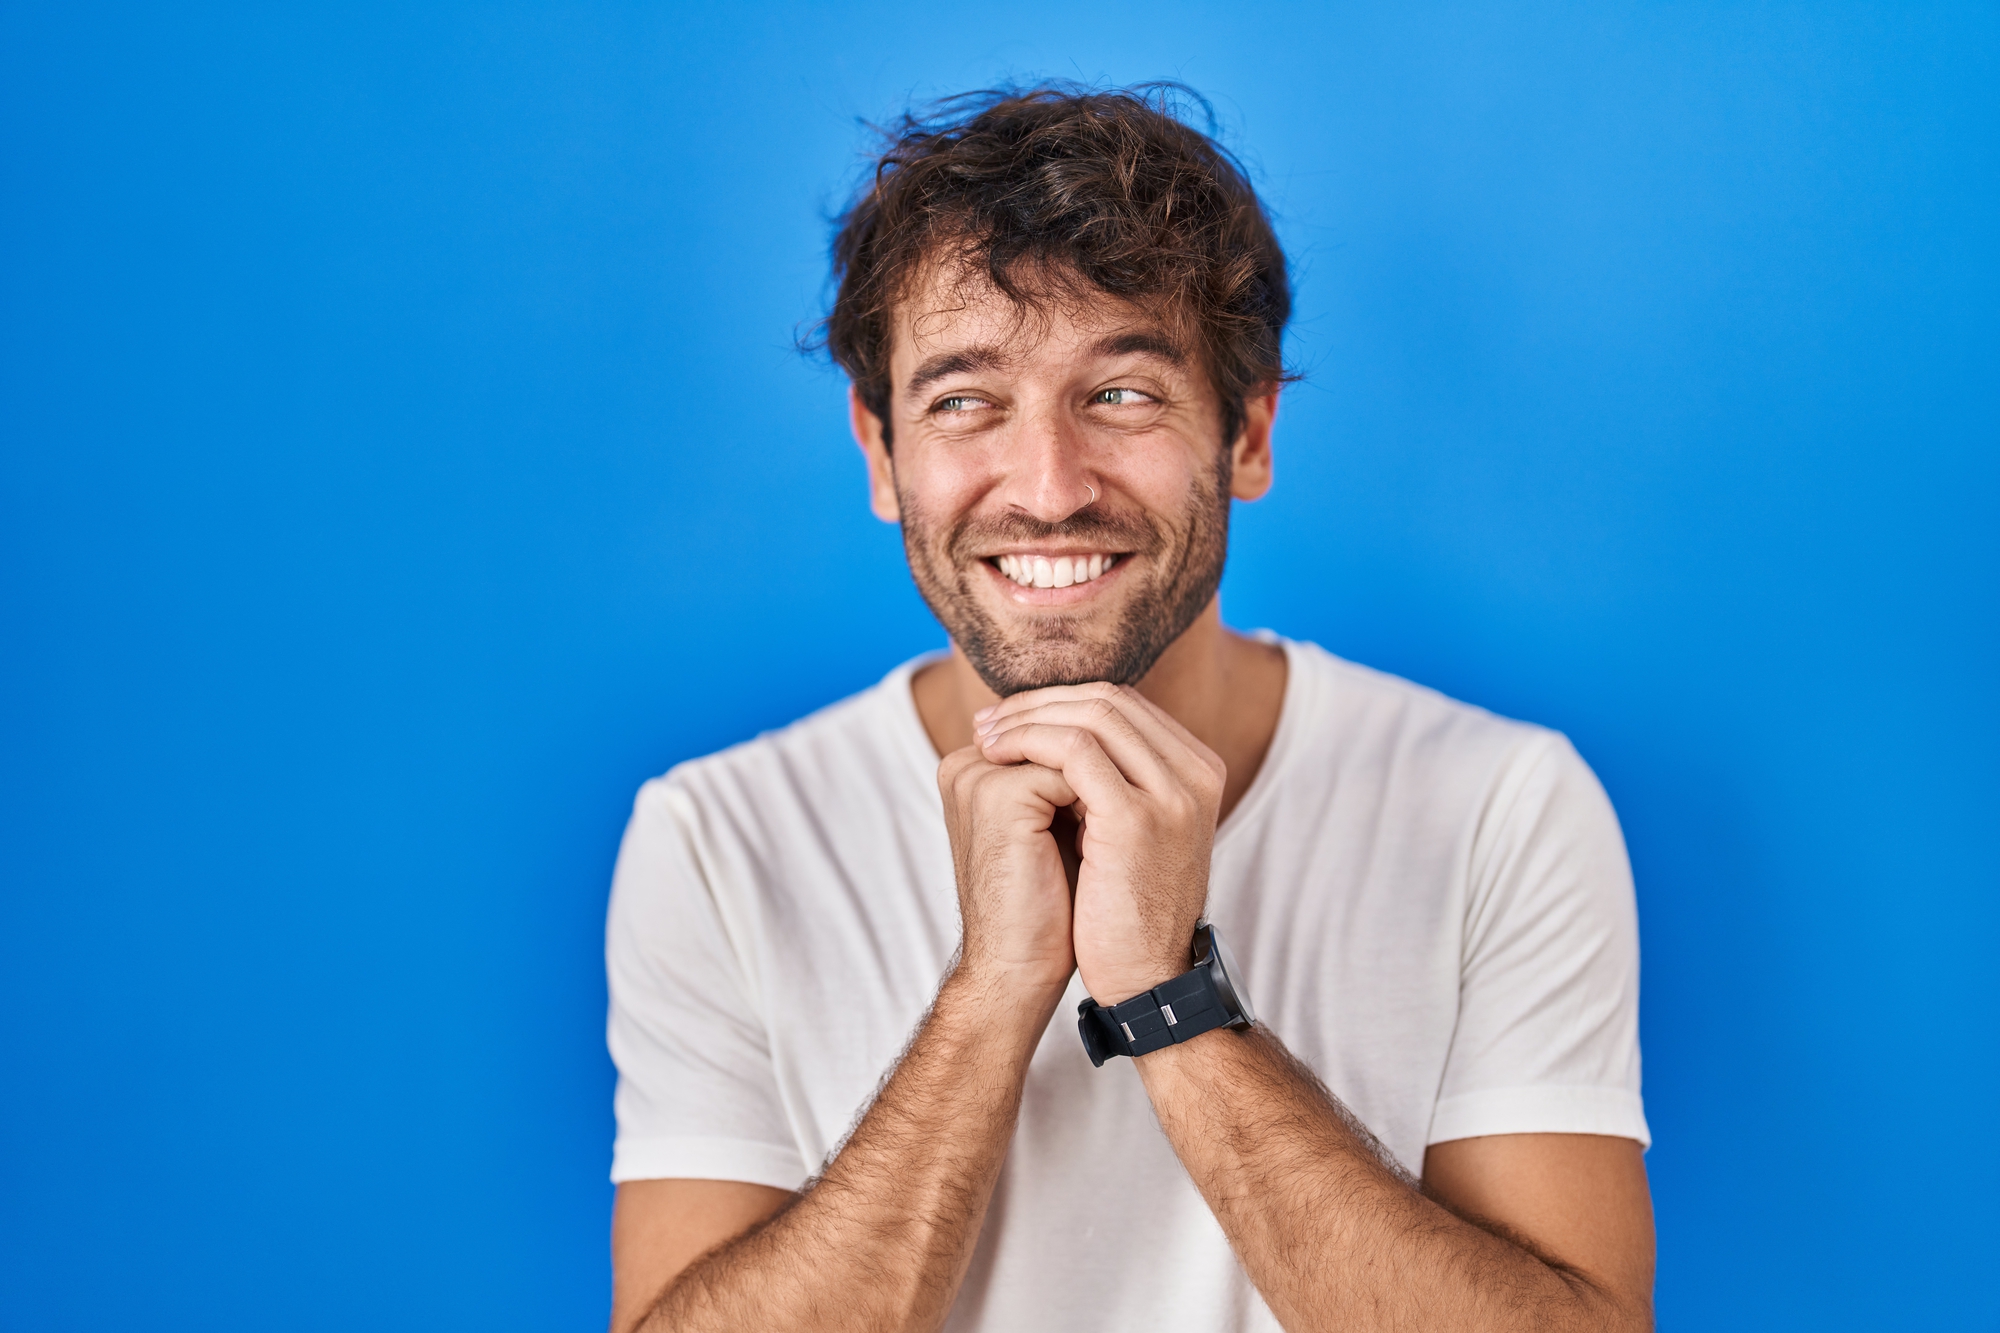 Hispanic young man standing over blue background laughing nervous and excited with hands on chin looking to the side